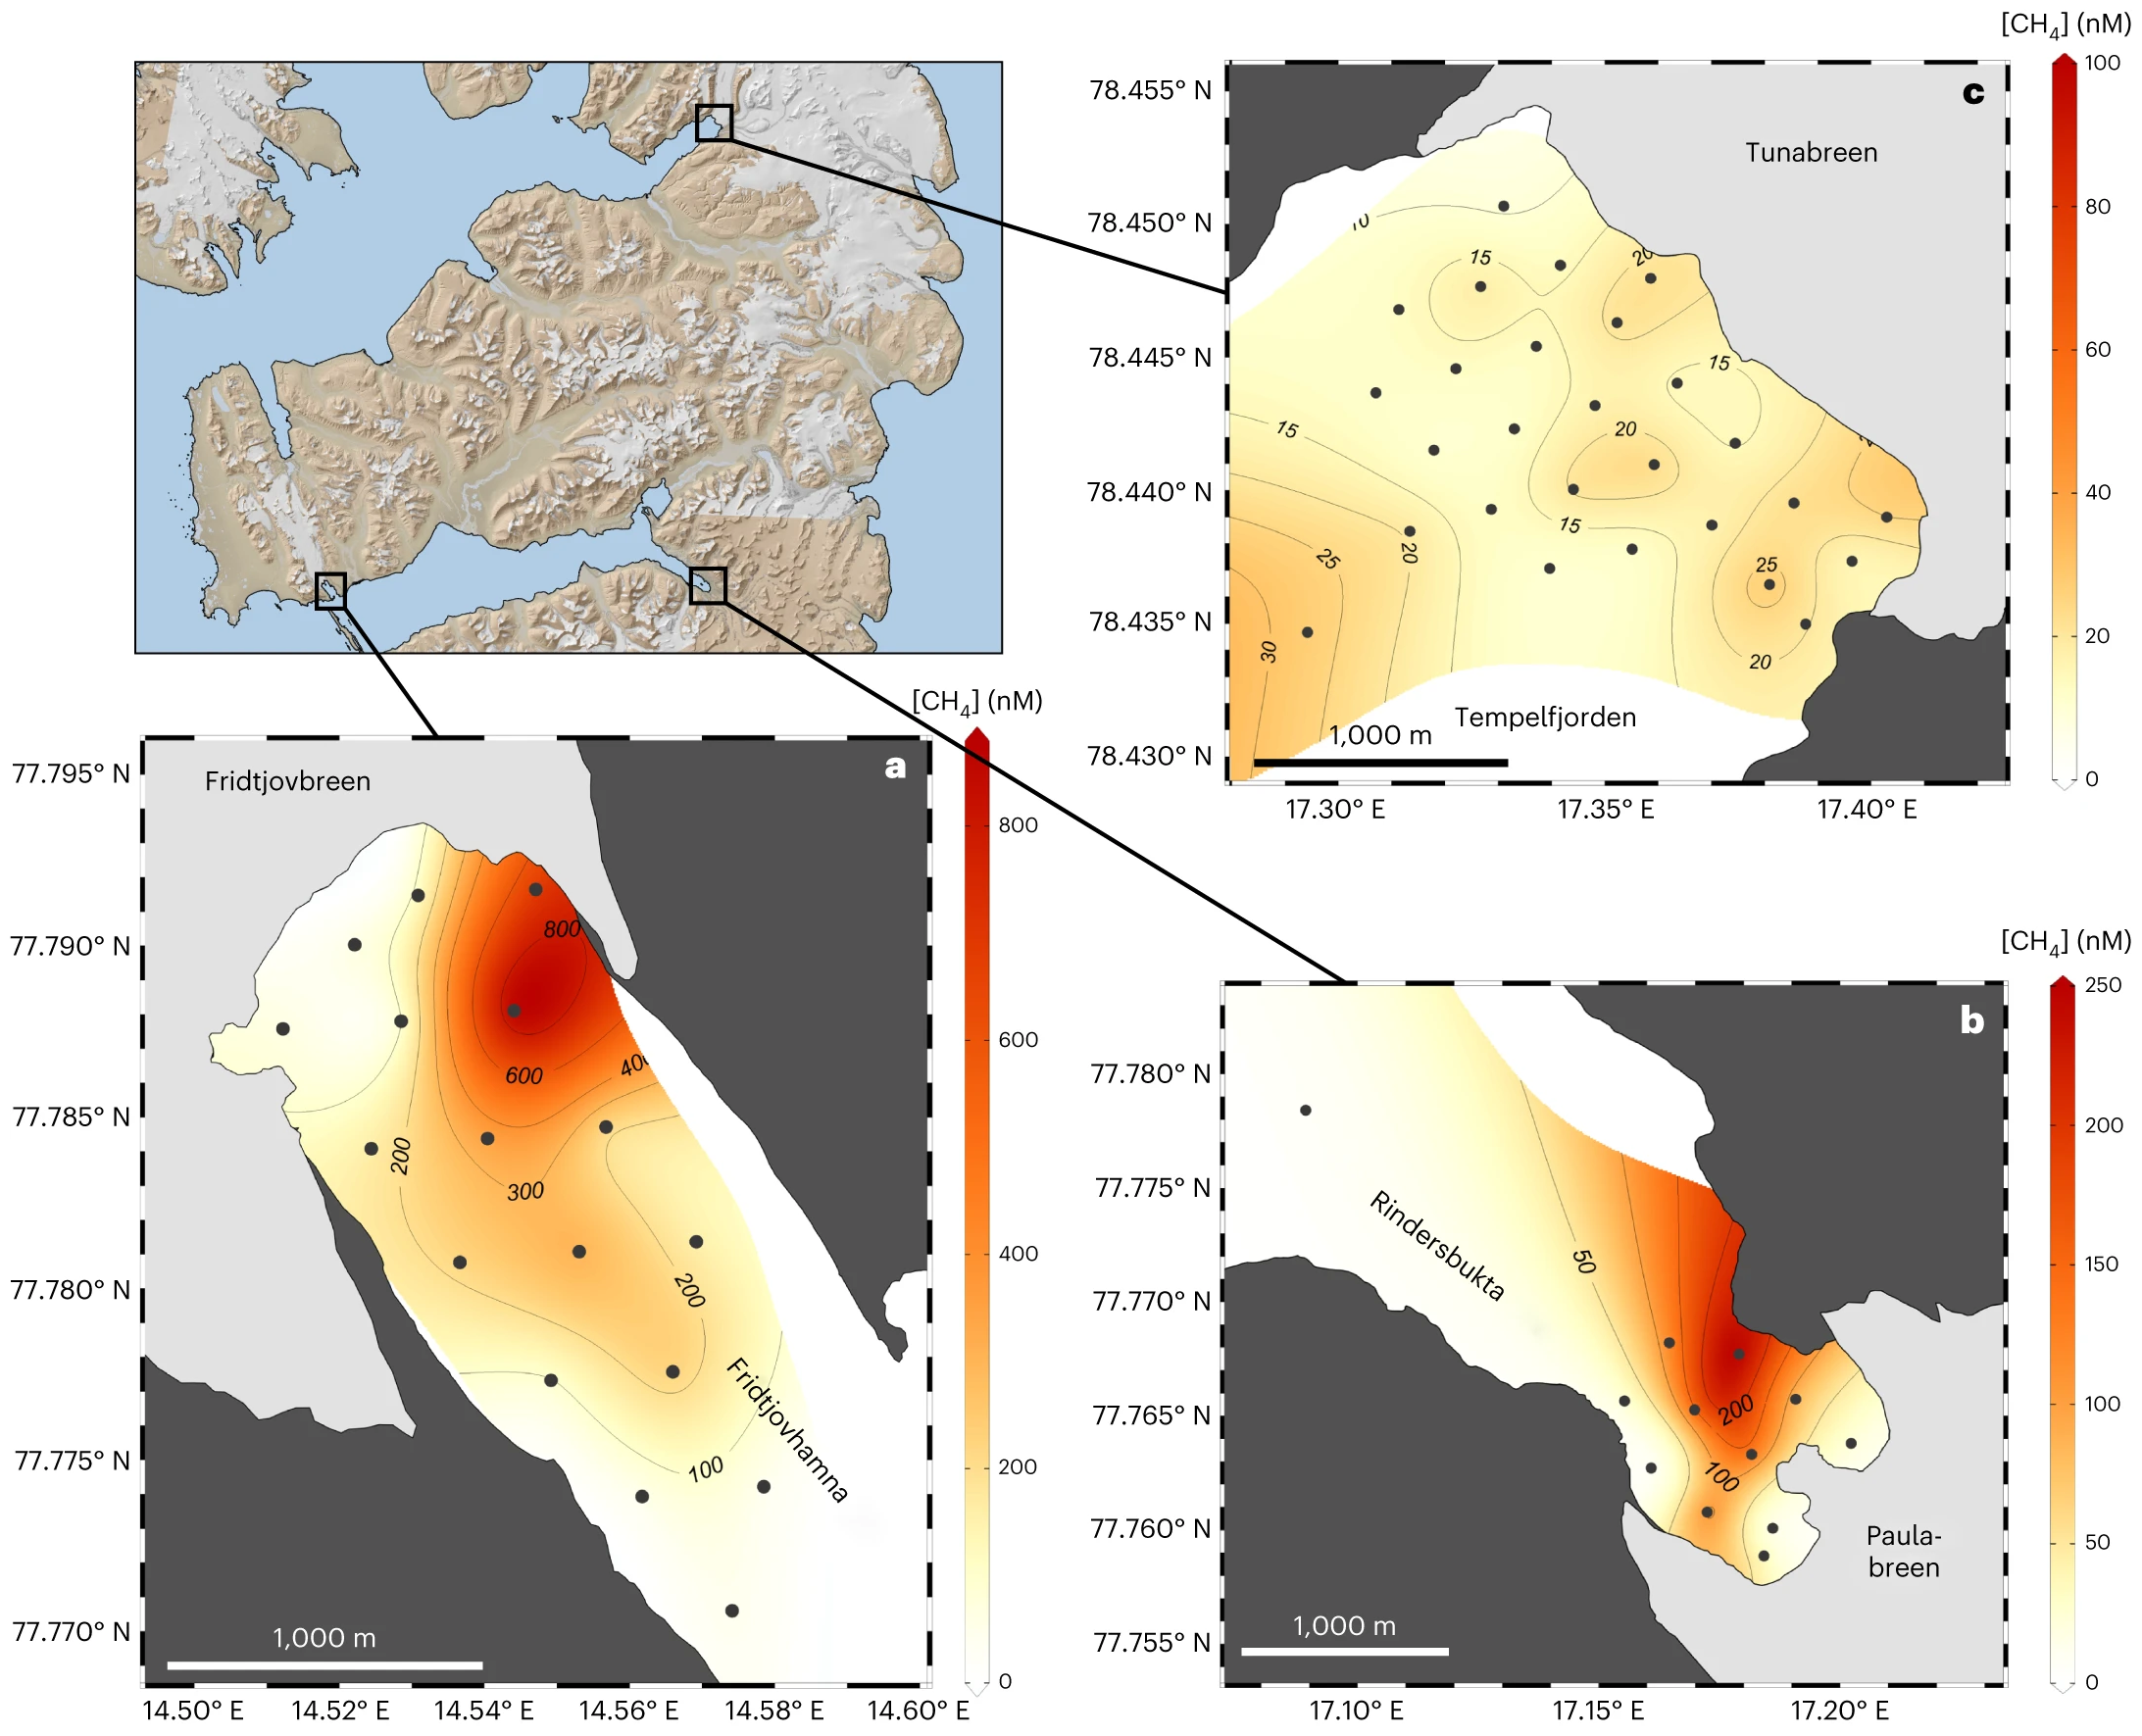 Methane concentrations (nM) are denoted by coloured shading on the maps and are interpolated from the sampling points (grey dots) using Data-Interpolating Variational Analysis. Note the different concentration scale on each map. Concentrations are displayed for subsea-ice surface waters adjacent to three marine-terminating glaciers (glaciers are light grey; land is dark grey). a, Fridtjovbreen (Triassic–Middle Jurassic). b, Paulabreen (Early Cretaceous). c, Tunabreen (Carboniferous and Permian). Water depths are less than 60 m. Land and glacier shapefiles were digitalized manually by tracing Sentinel-2 satellite images. Figure created with Ocean Data View (https://odv.awi.de). Graphic: Kleber, et al., 2023 / Nature Geoscience